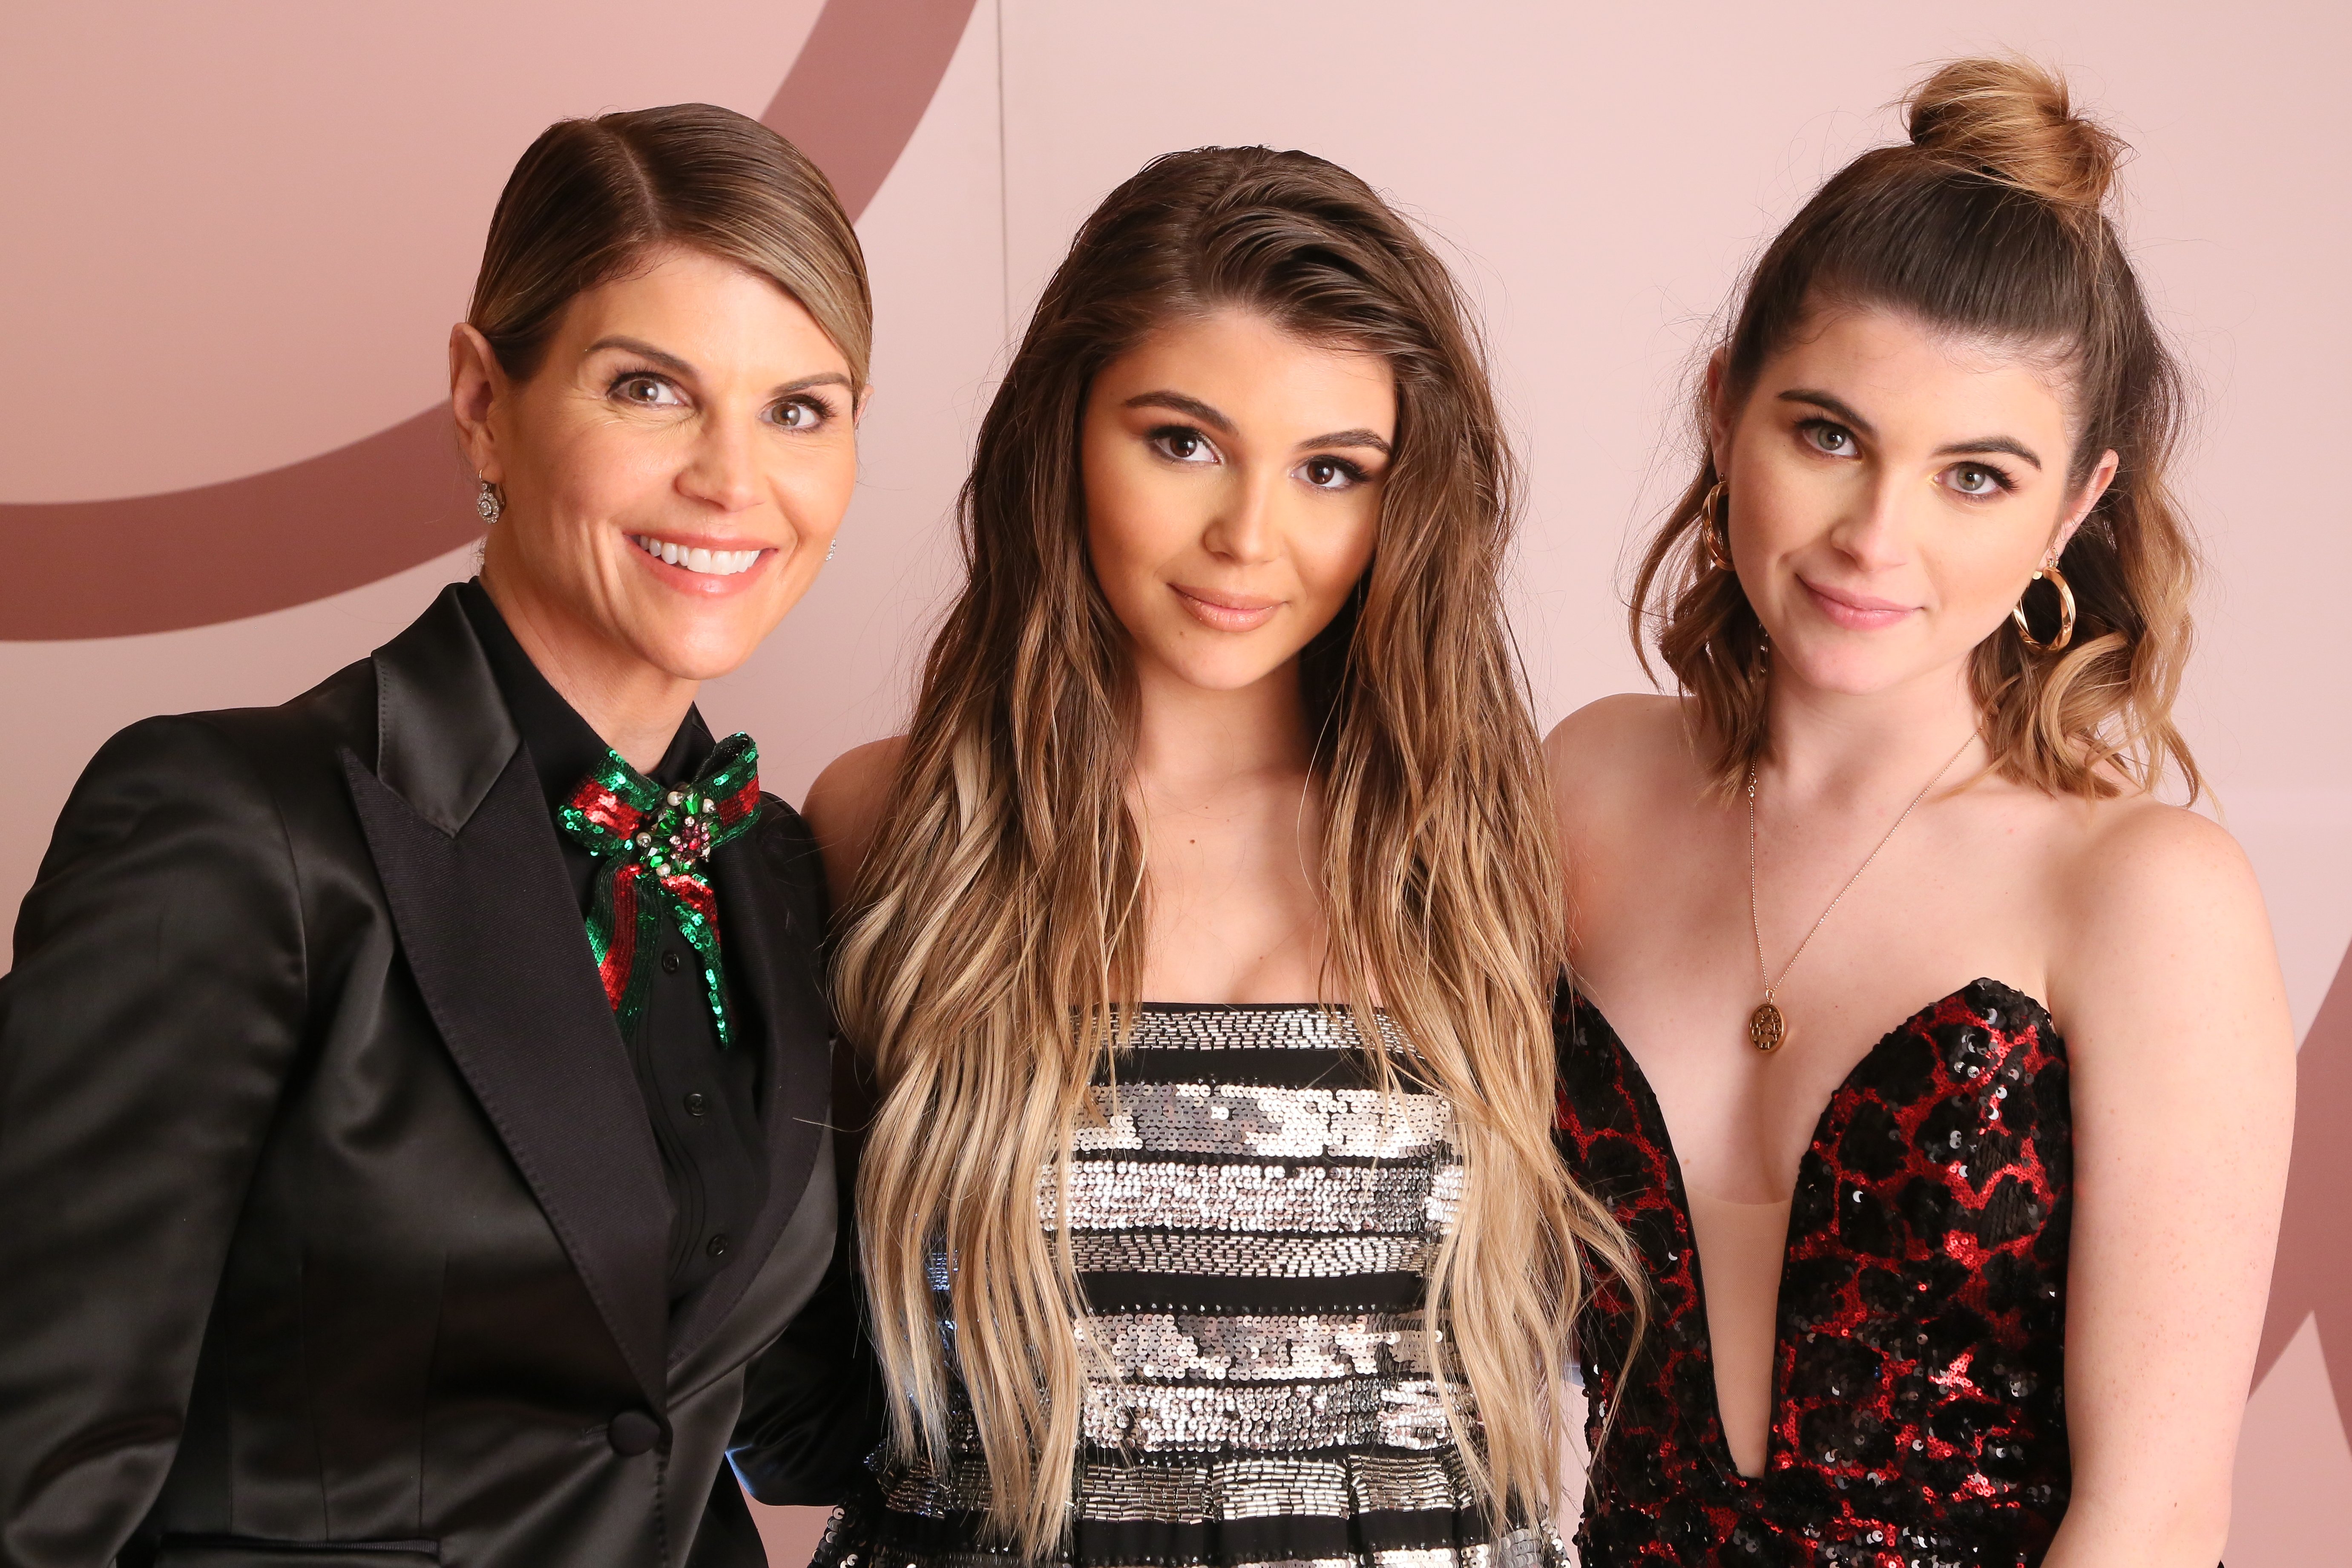 Lori Loughlin, Olivia Jade Giannulli and Isabella Rose Giannulli celebrate the Olivia Jade X Sephora Collection Palette Launching. | Photo: GettyImages